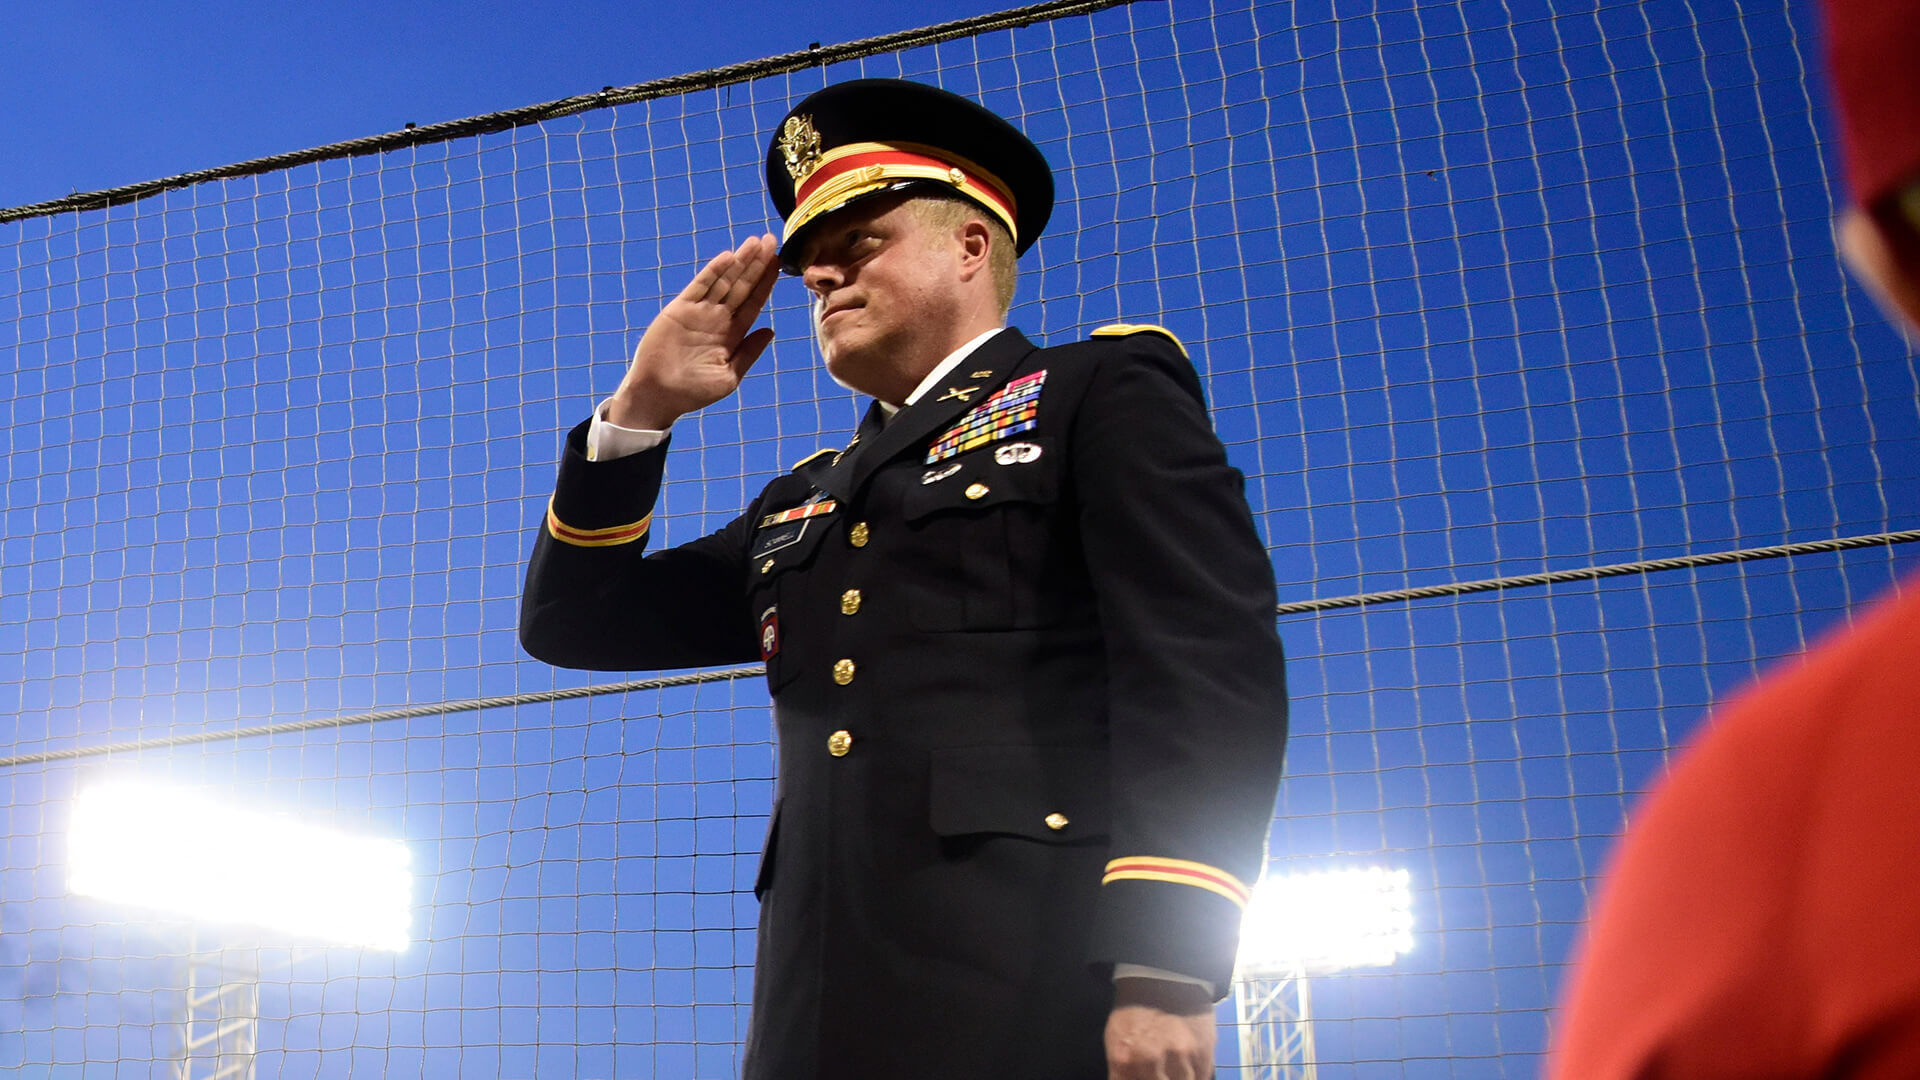 An American military service member saluting during a Red Sox game at Fenway Park in Boston, Massachusetts, USA 